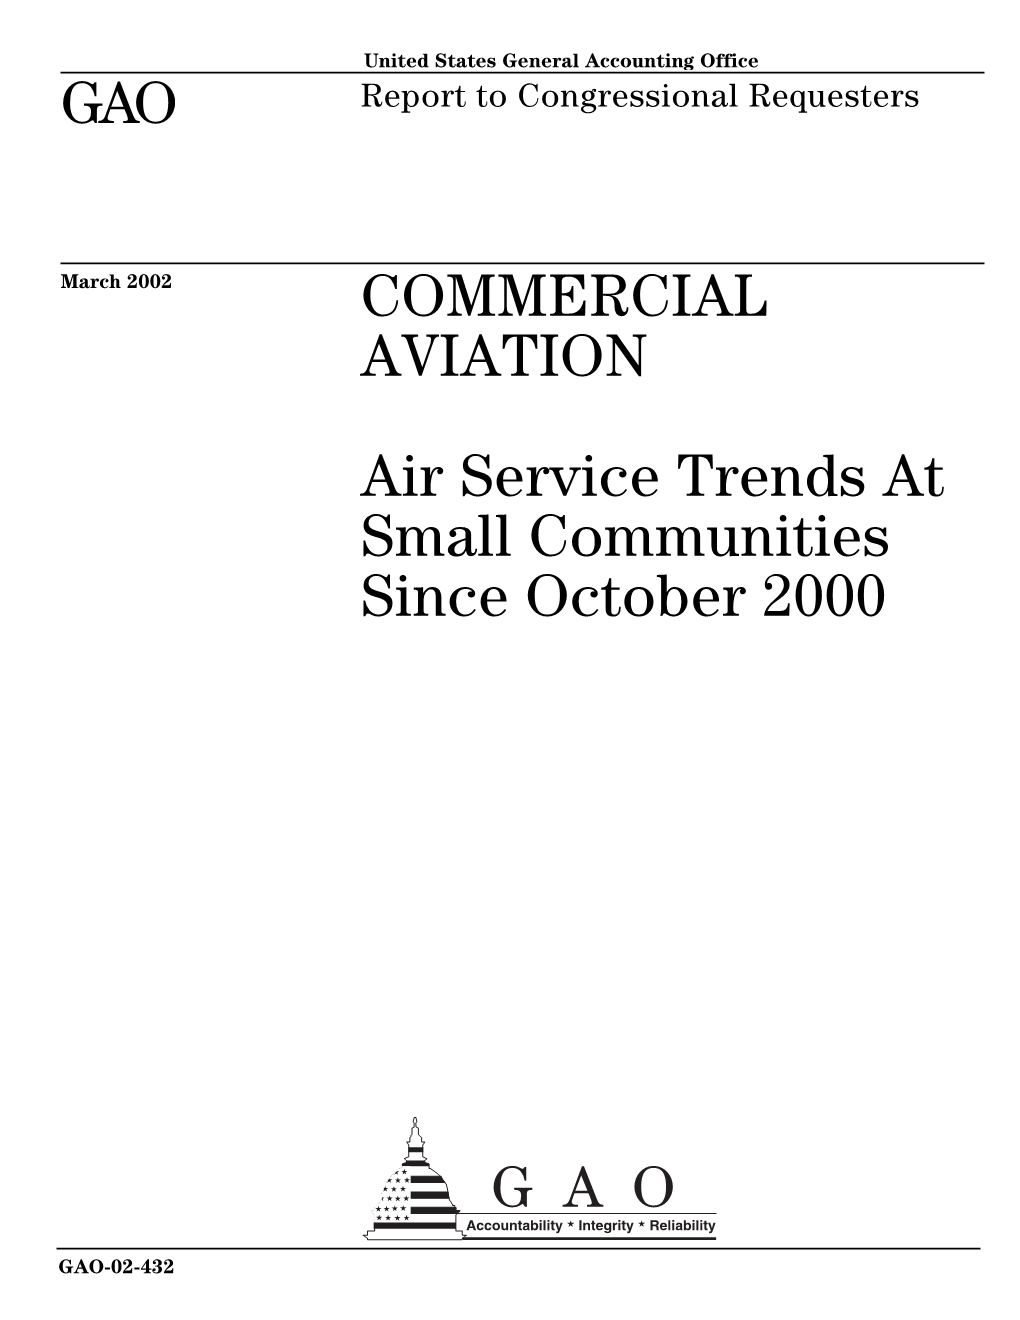 GAO-02-432 Commercial Aviation